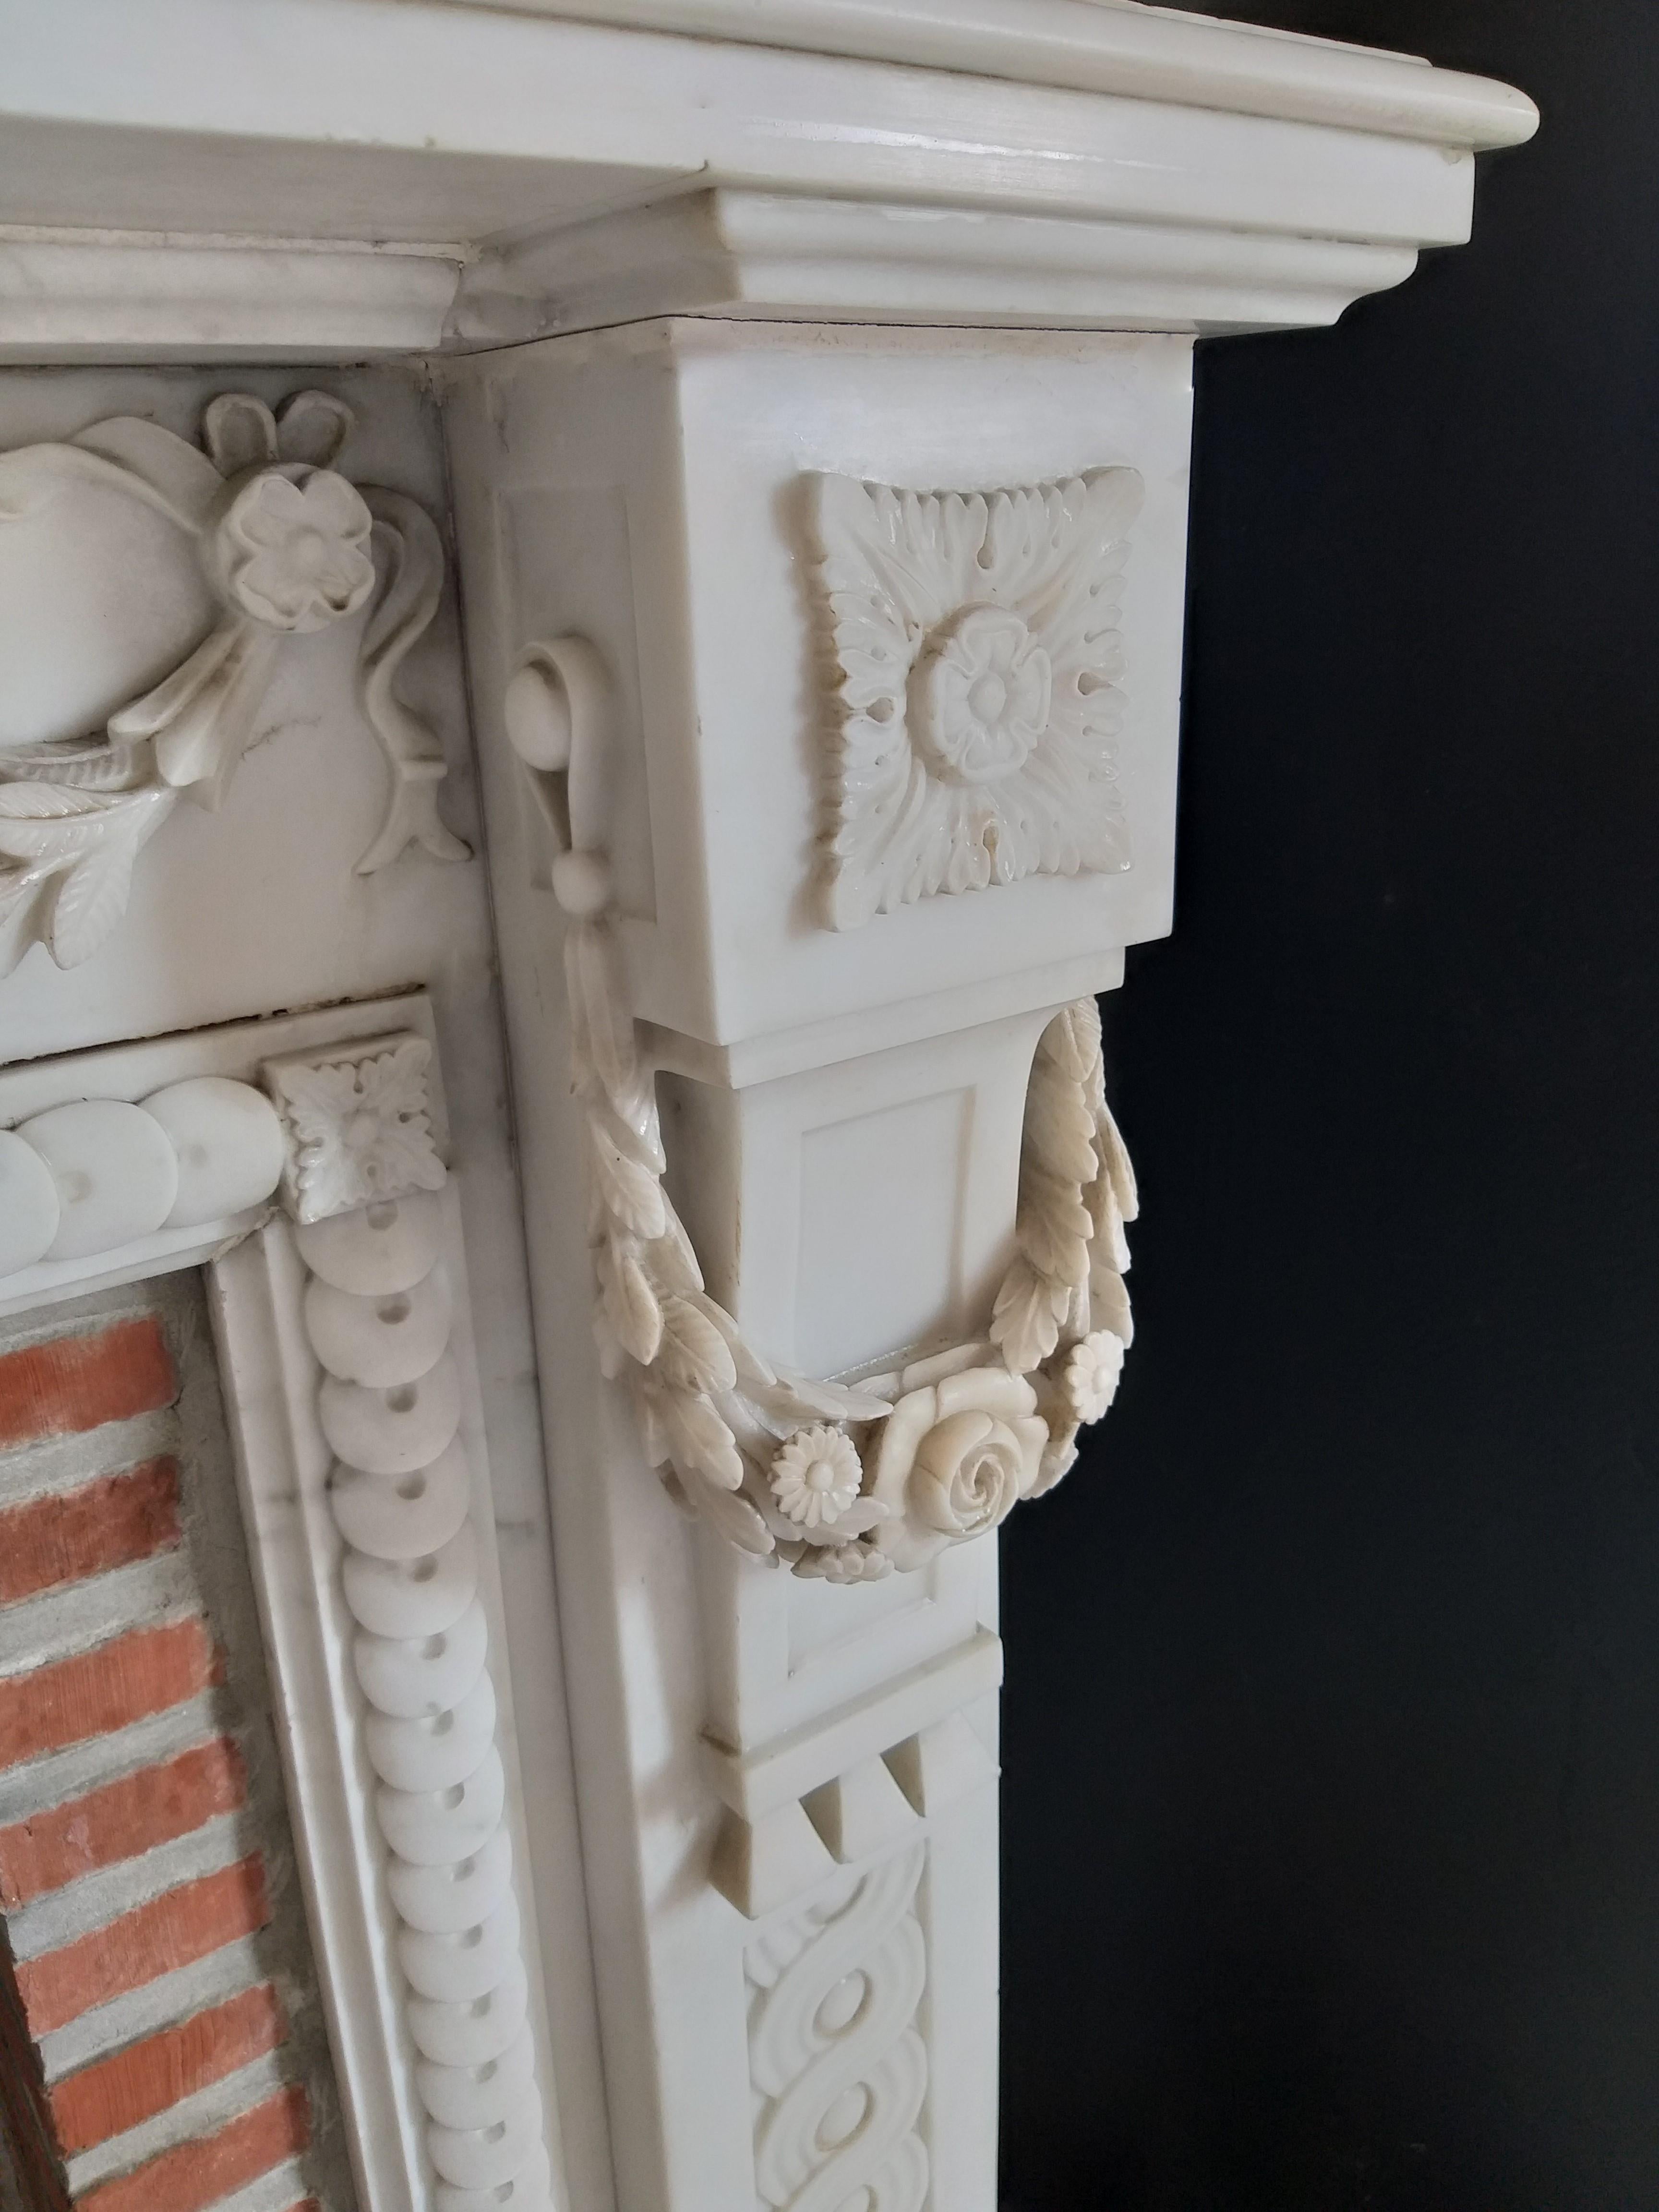 This classy, antique fireplace in Louis XVI style was made out of Carrara-marble, soft statuary, during the 19th century. It stood once in one of the rooms of the Maison Gouverneur Dubonnaire at Mons-Belgium.  Build in 1879, also the year this